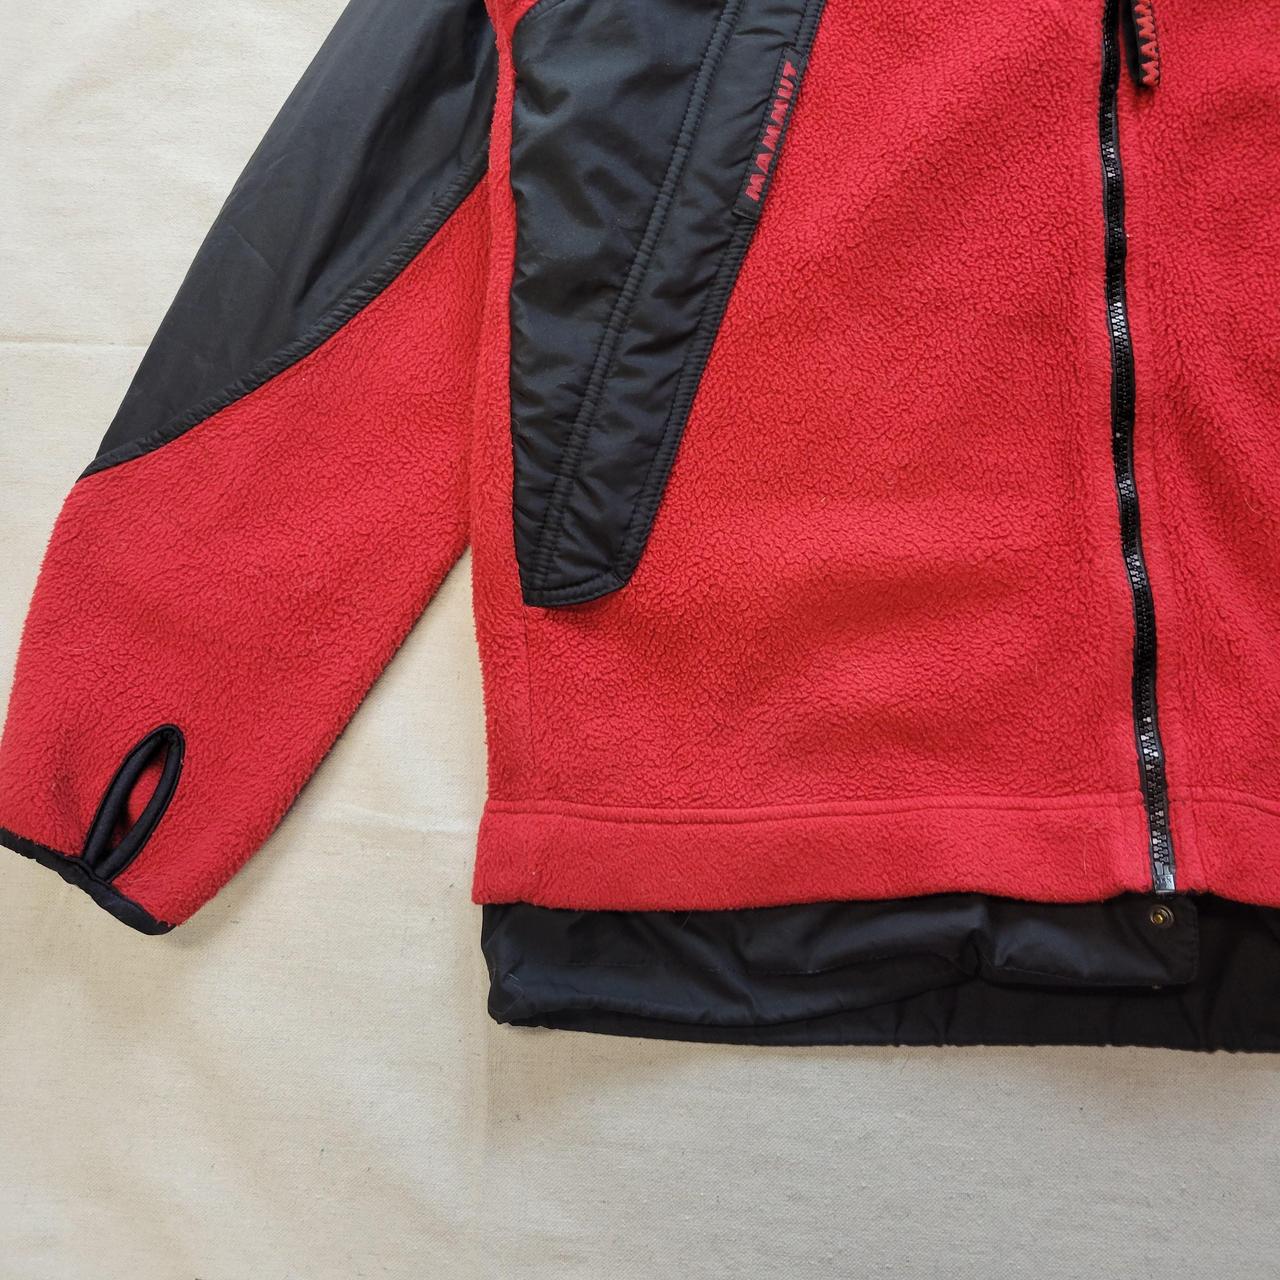 Mammut Men's Red and Black Jacket (3)